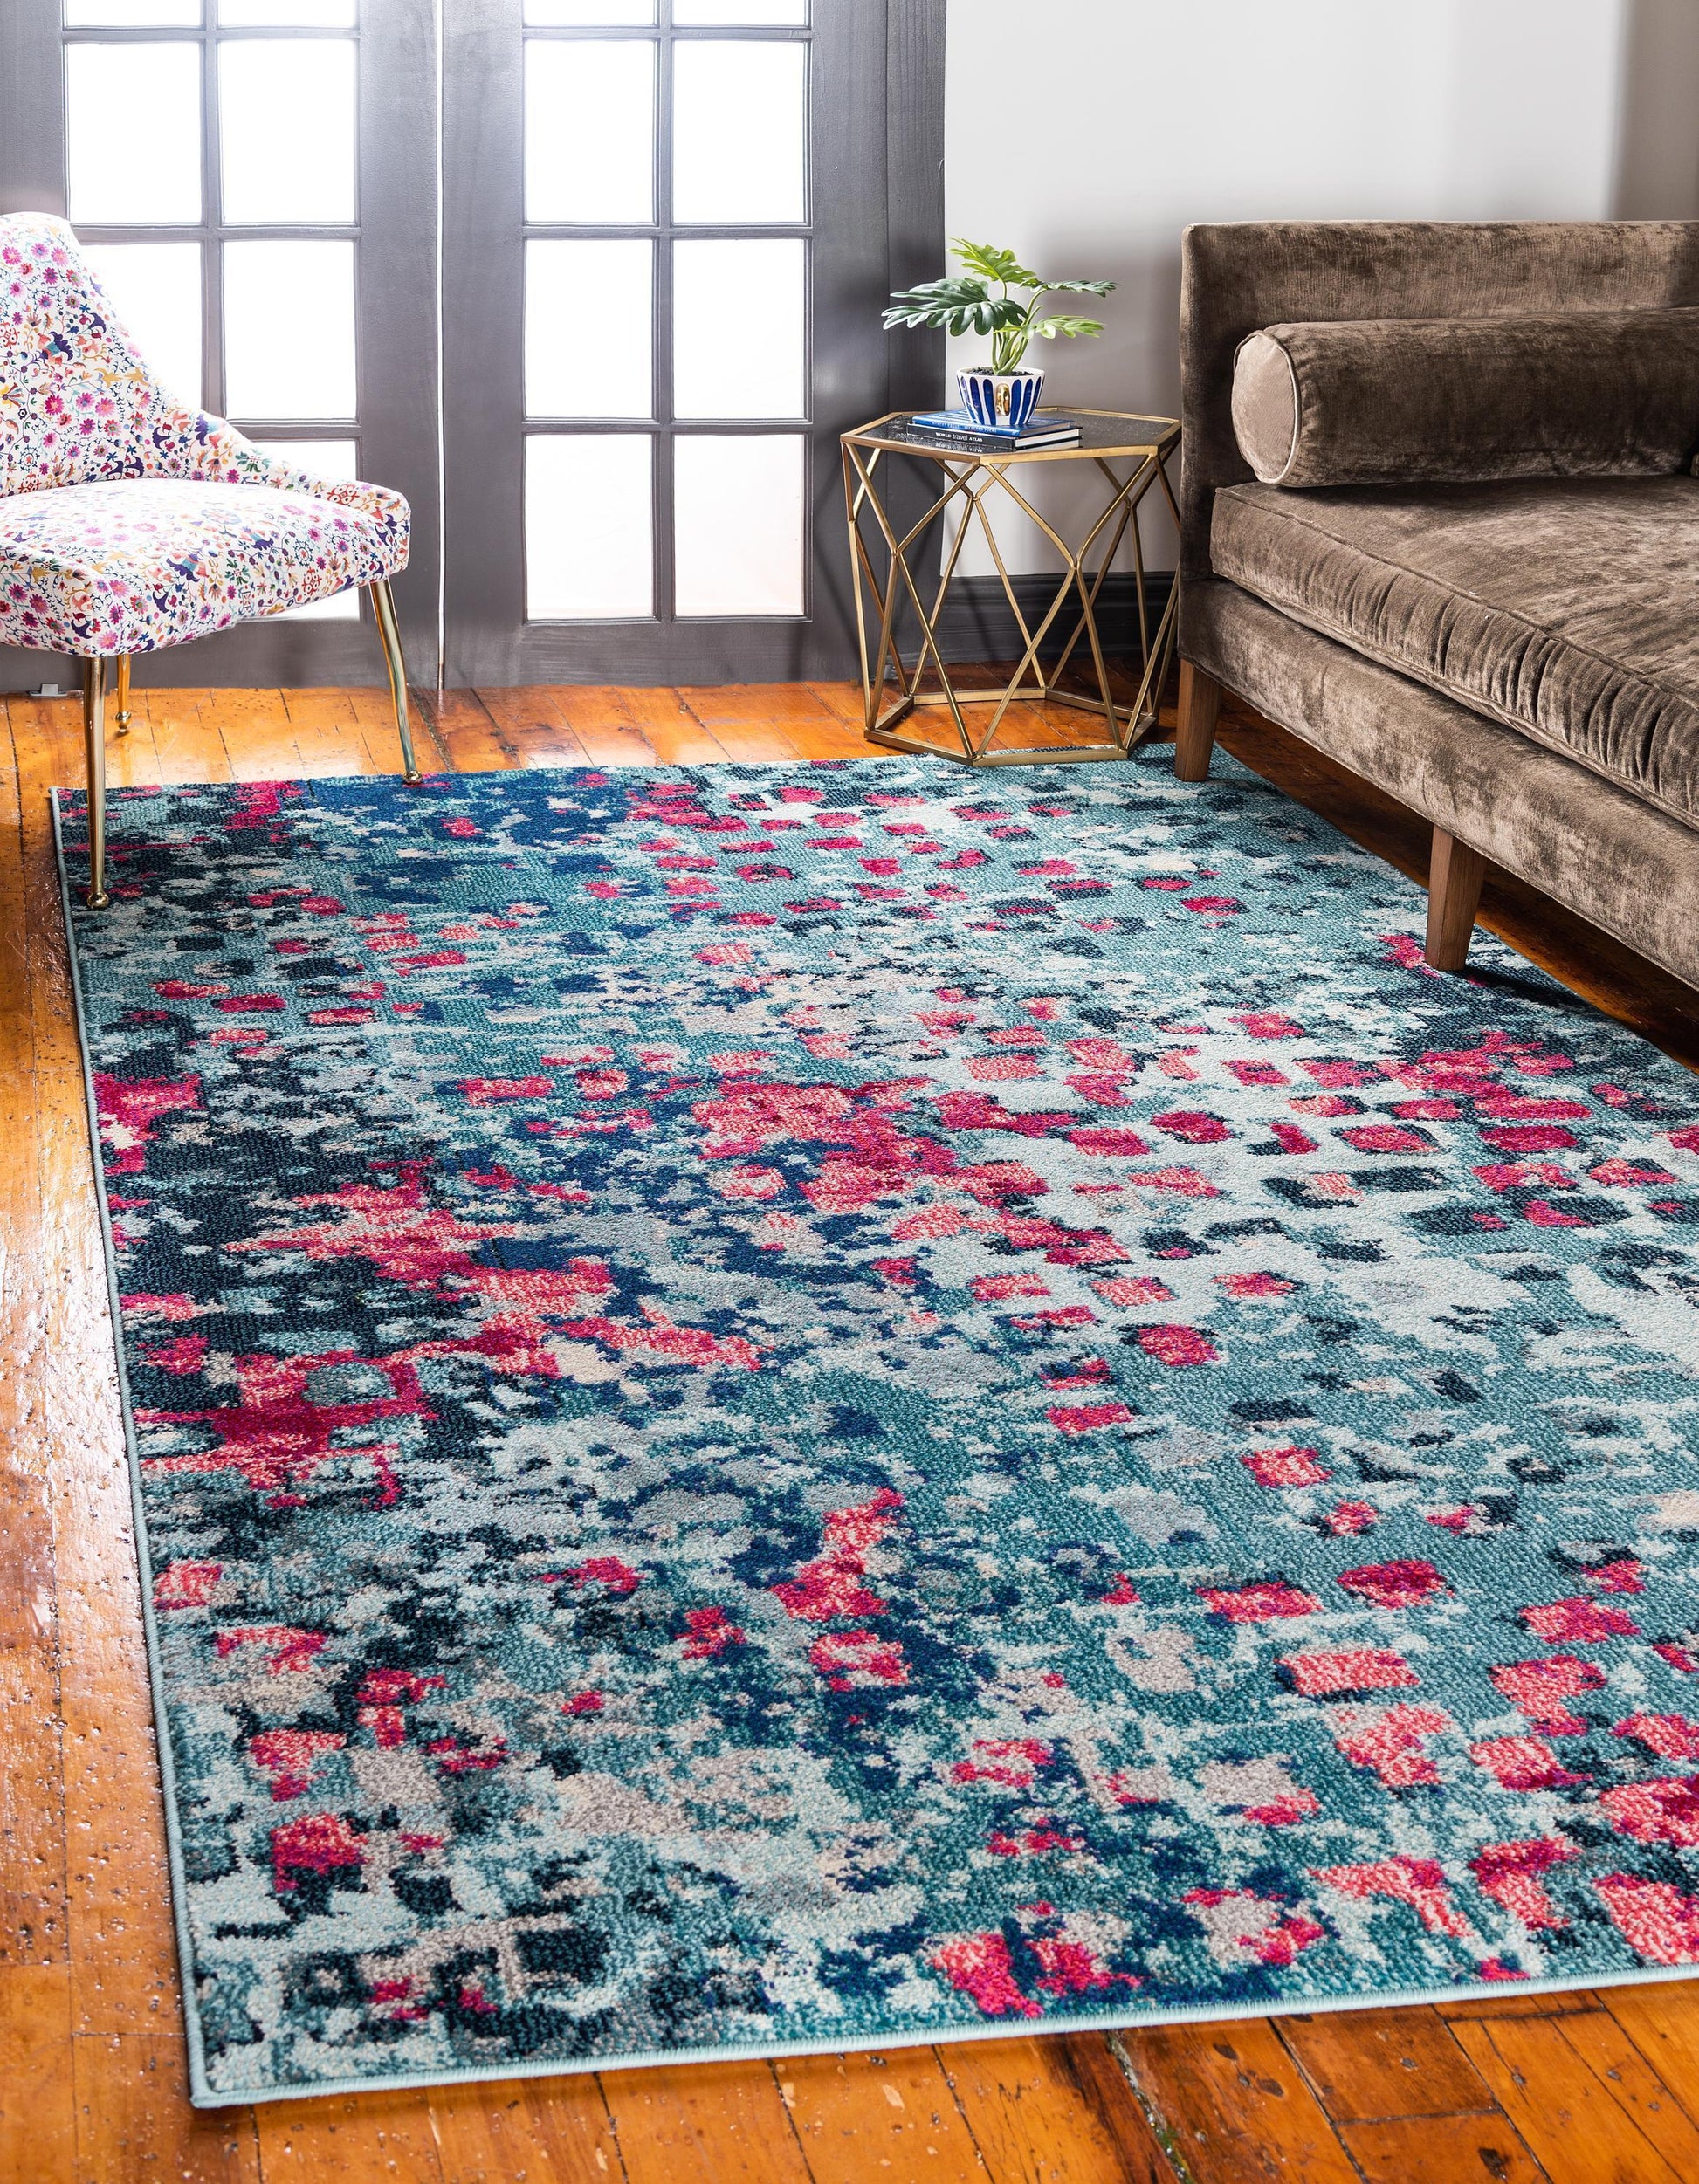 Blaise - Modern Color Pattern Rug - Veooy